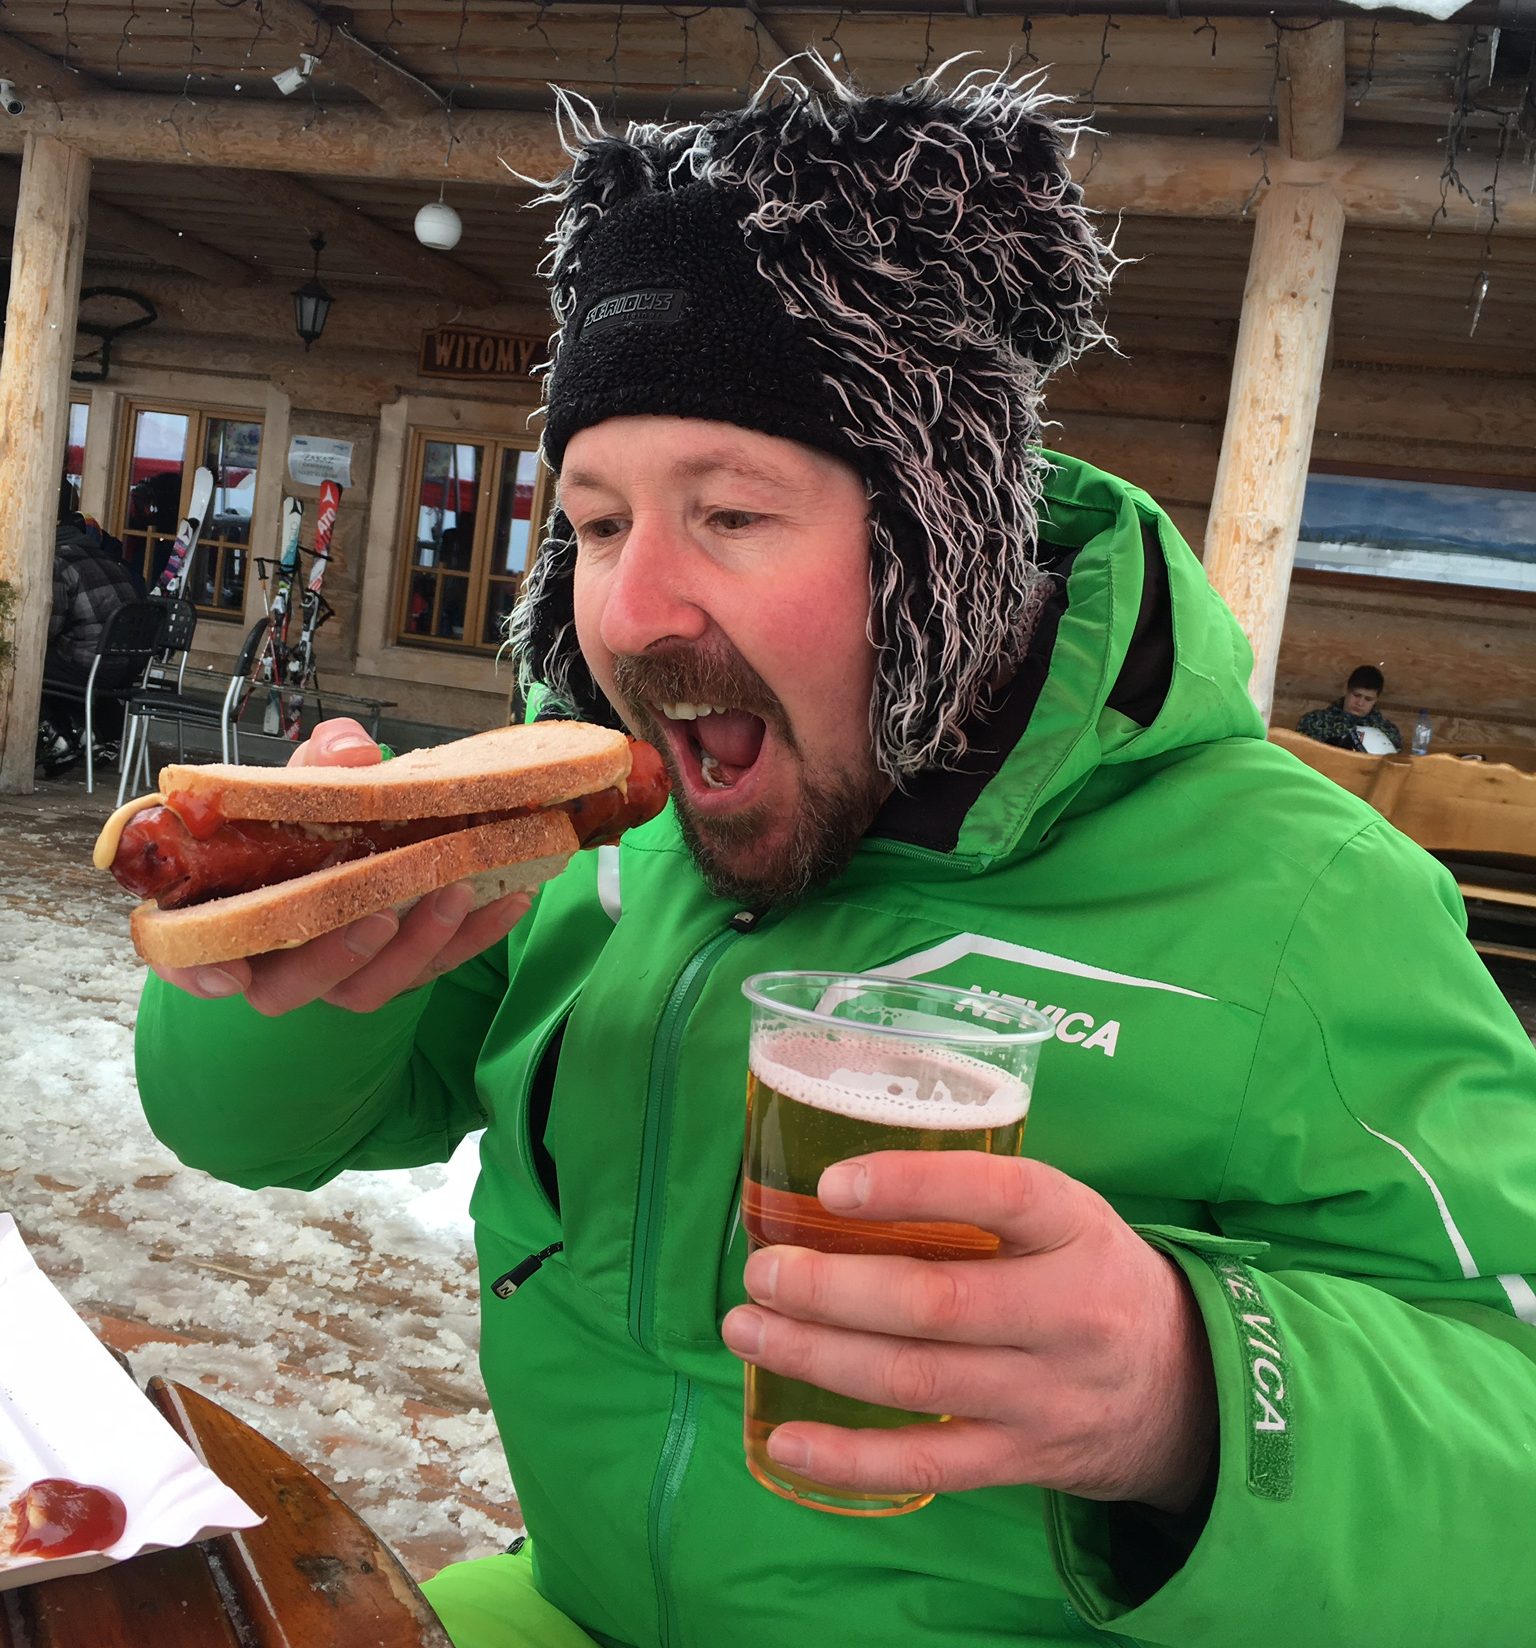 Skier with beer and hot dog